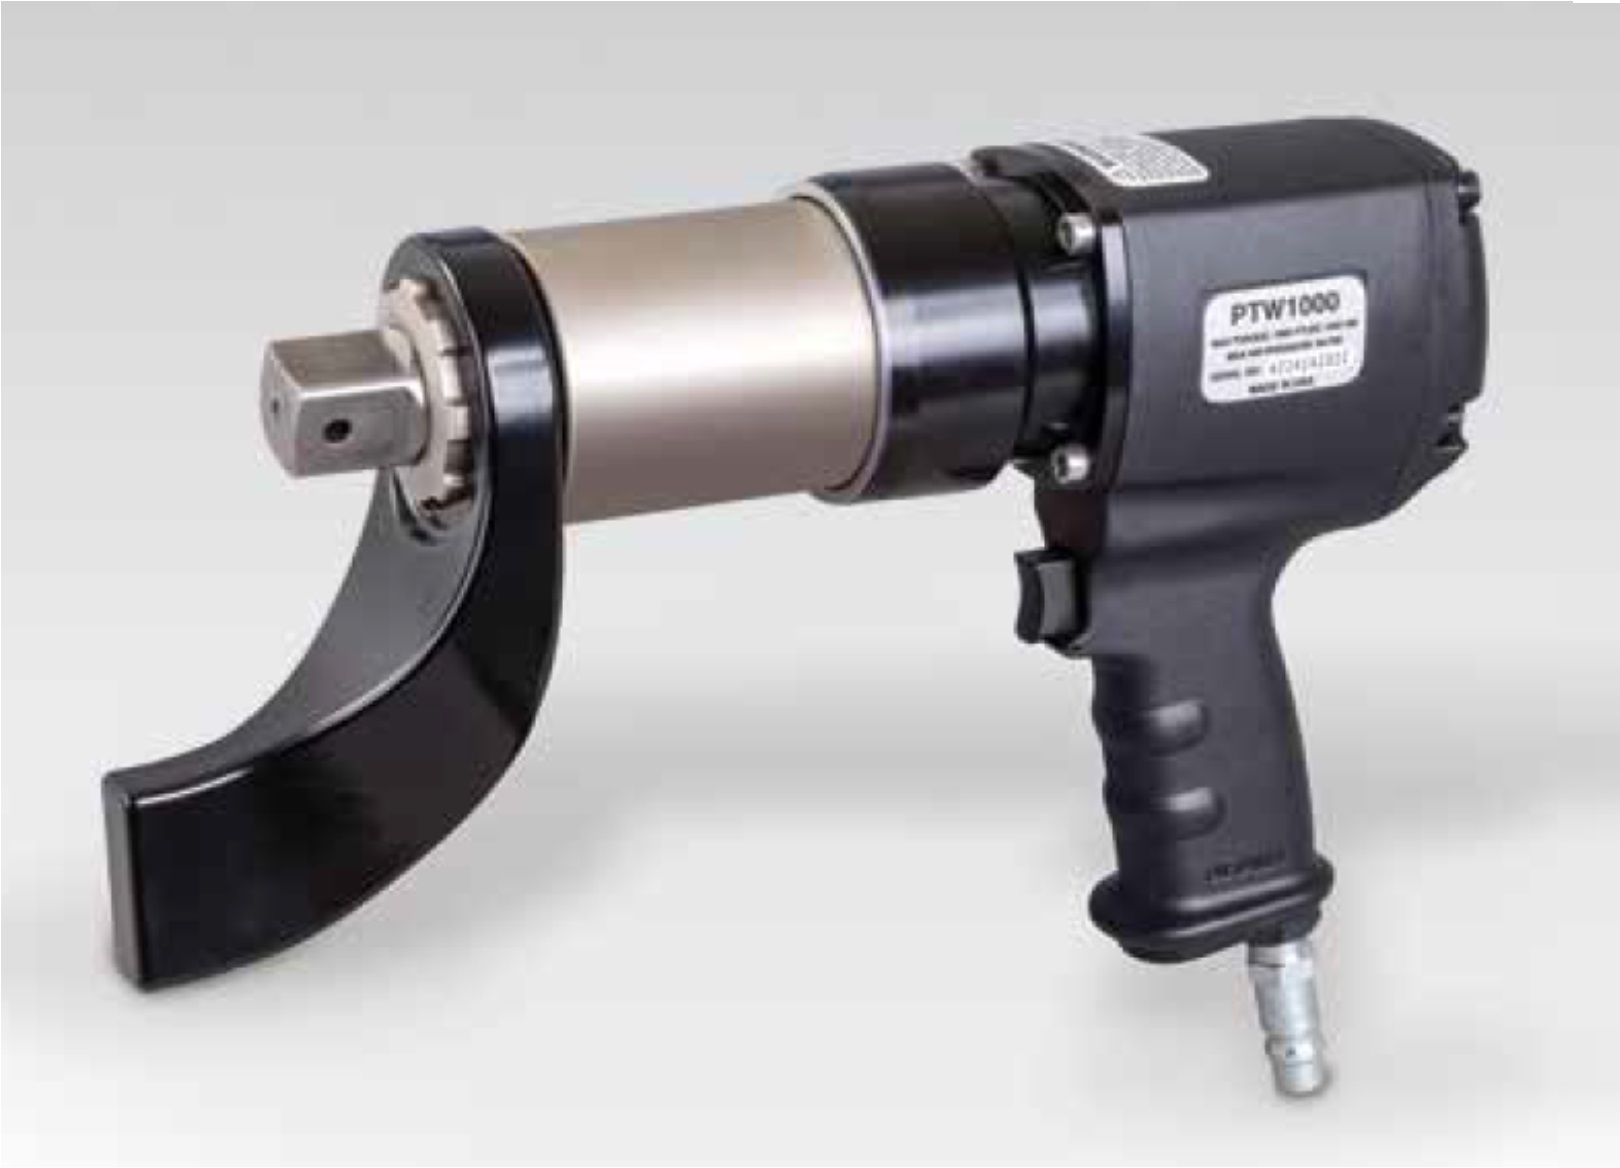 AME Pneumatic Torque Wrench PTW 1000